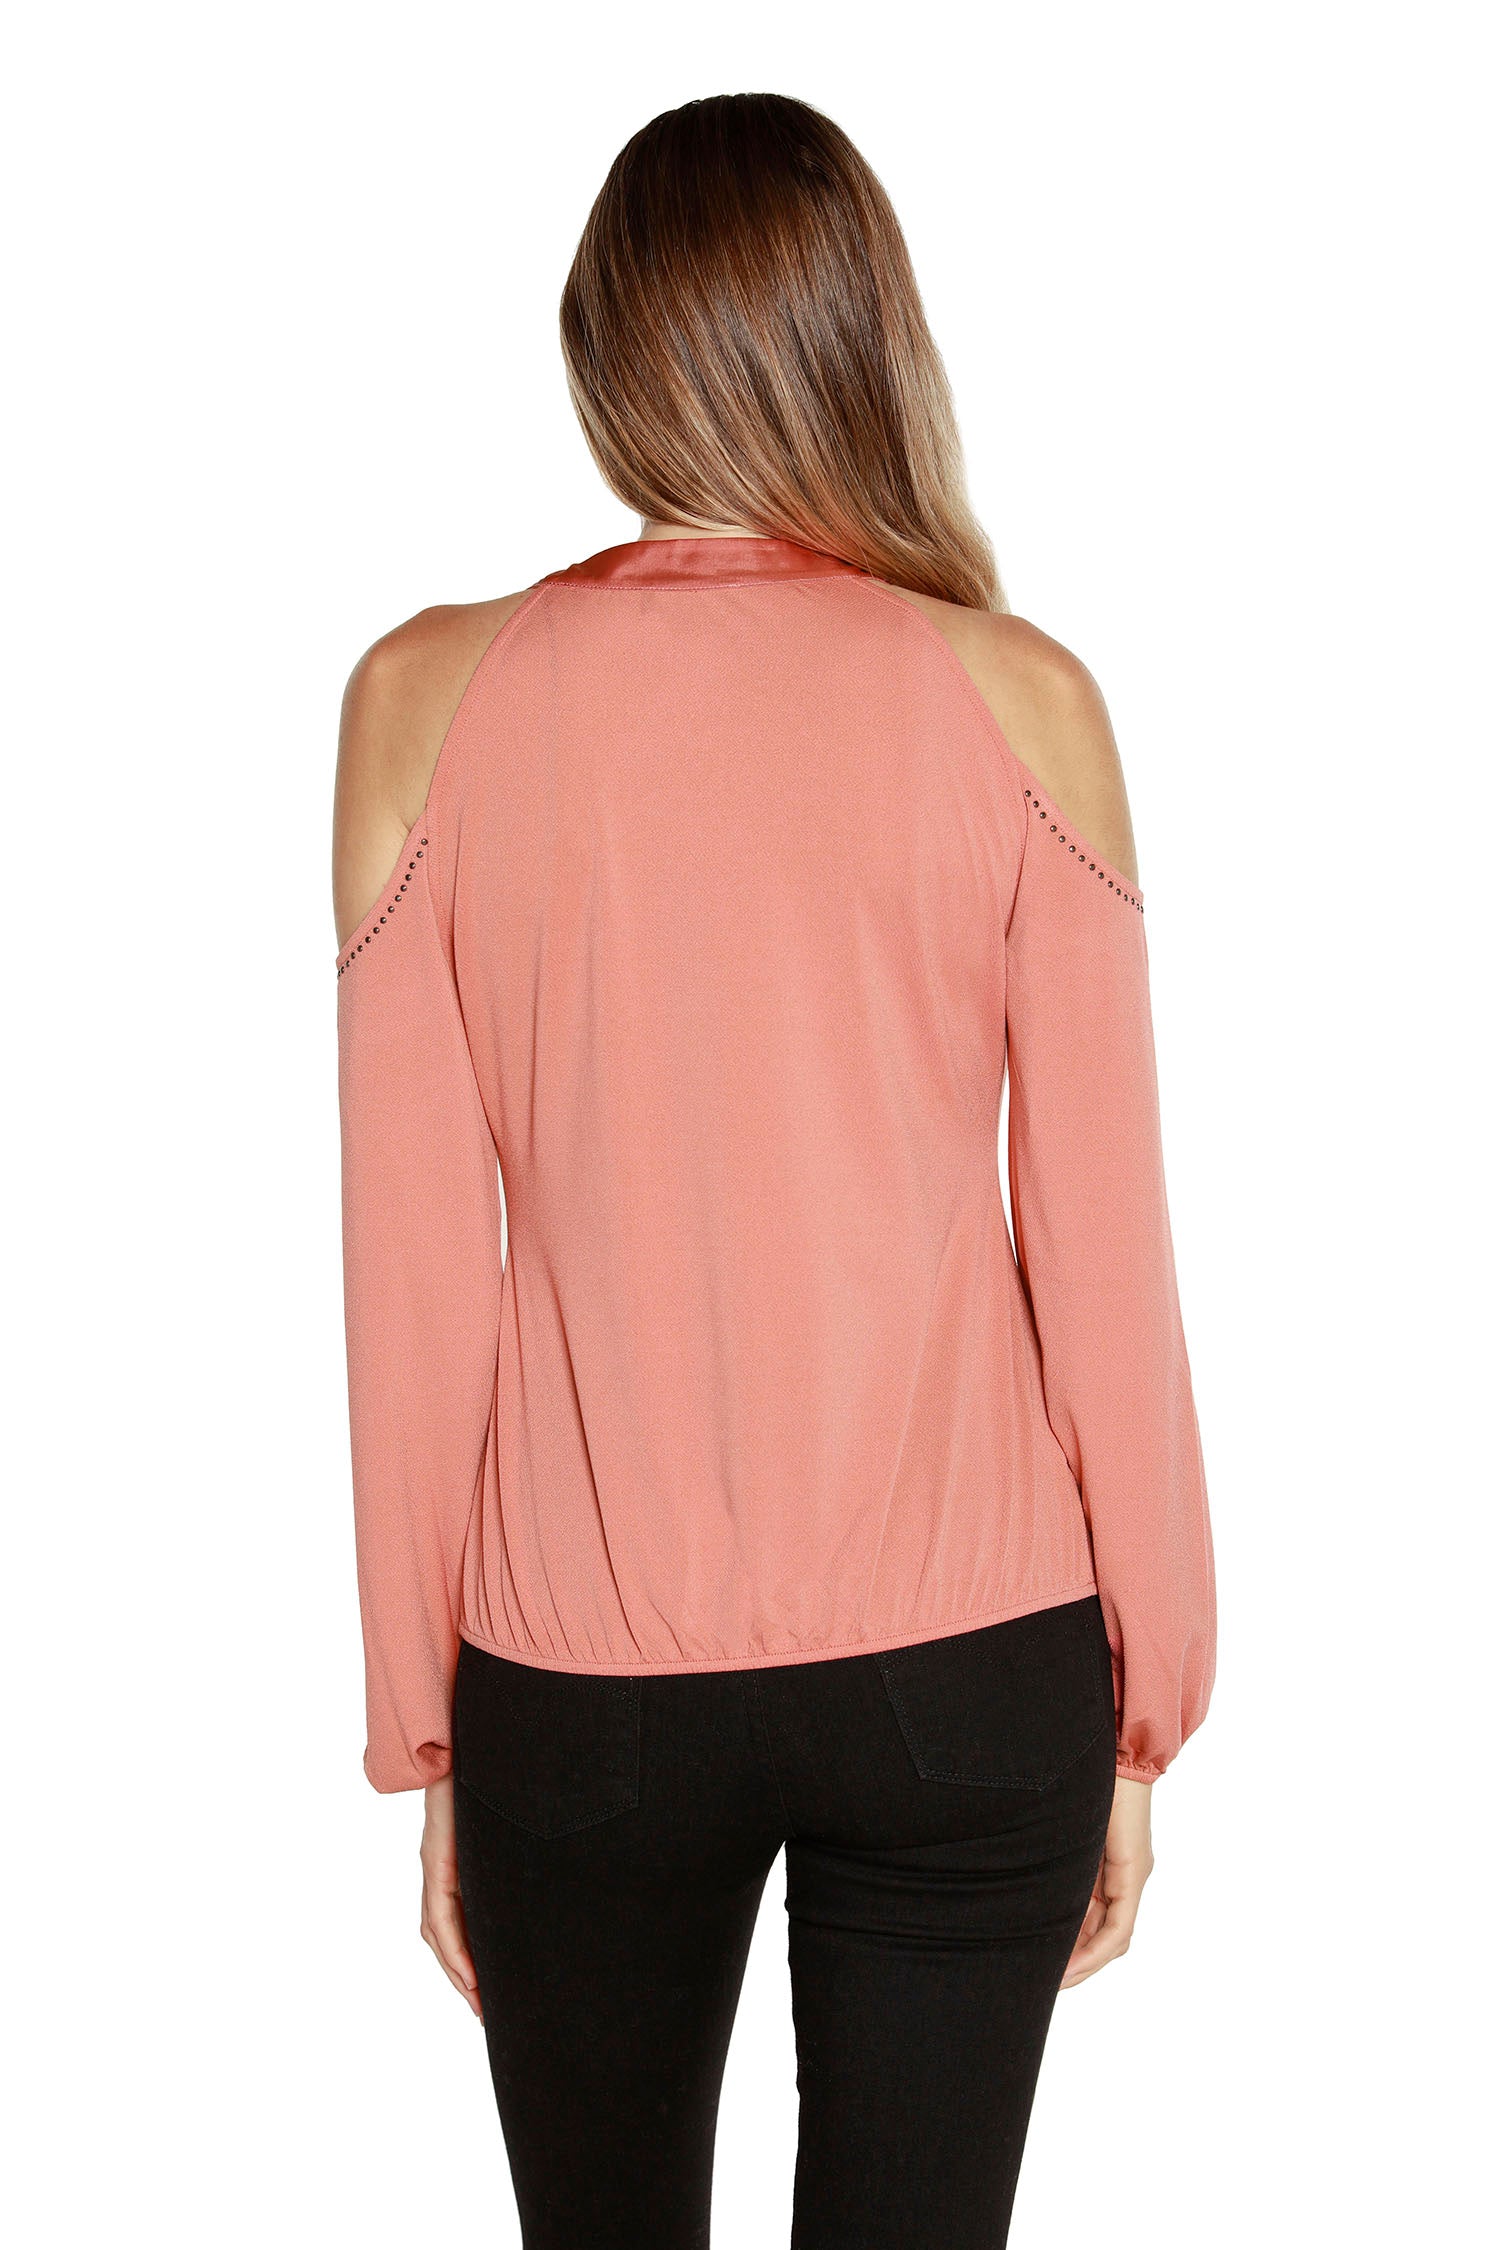 Women’s Cold Shoulder Blouse with V-Neck and Satin Trim